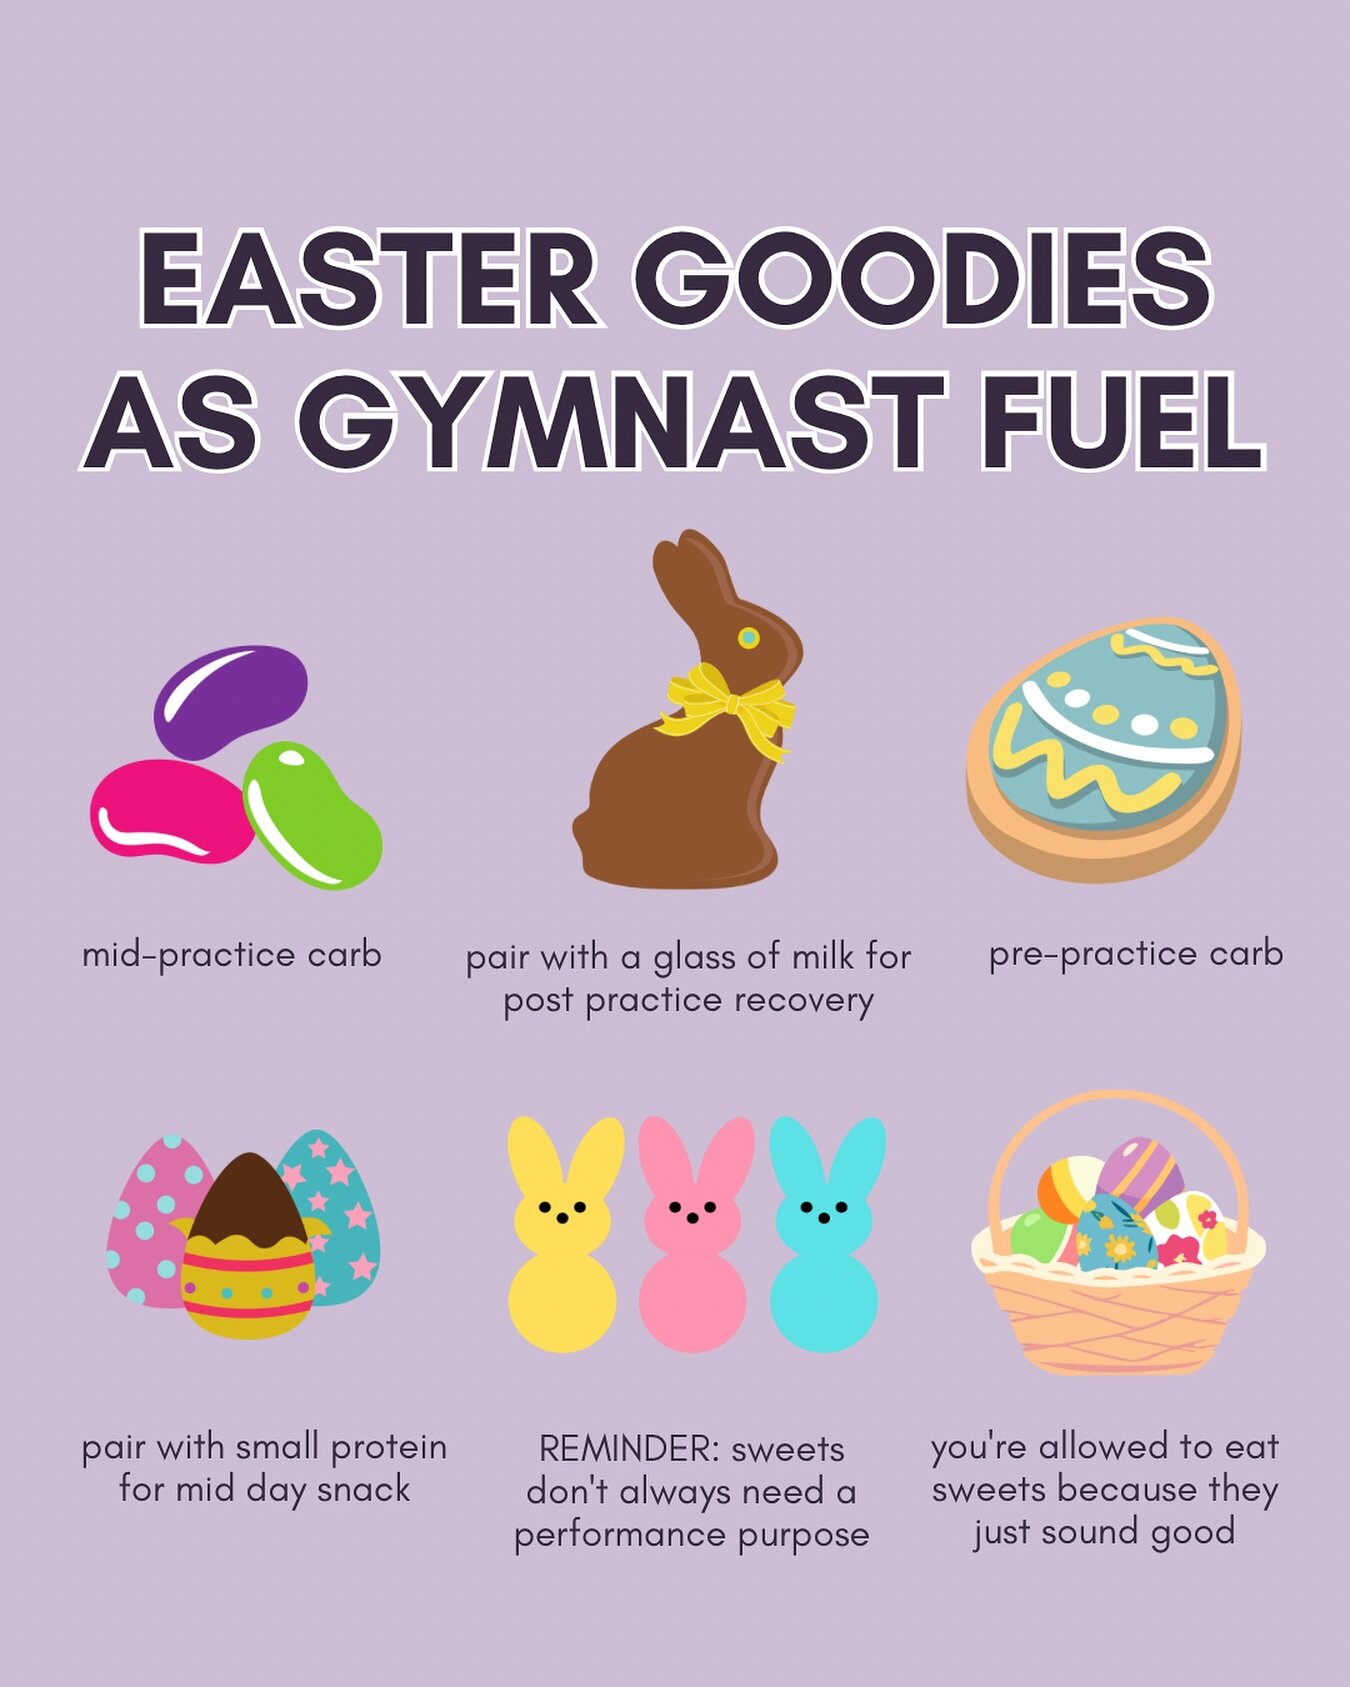 Hope everyone had a Happy Easter 🐣🐰 🌷

Friendly reminder that there is no ONE food that will make or break your health or performance. 

It&rsquo;s all about how you eat and how you move on a consistent basis, over time, that determines health and